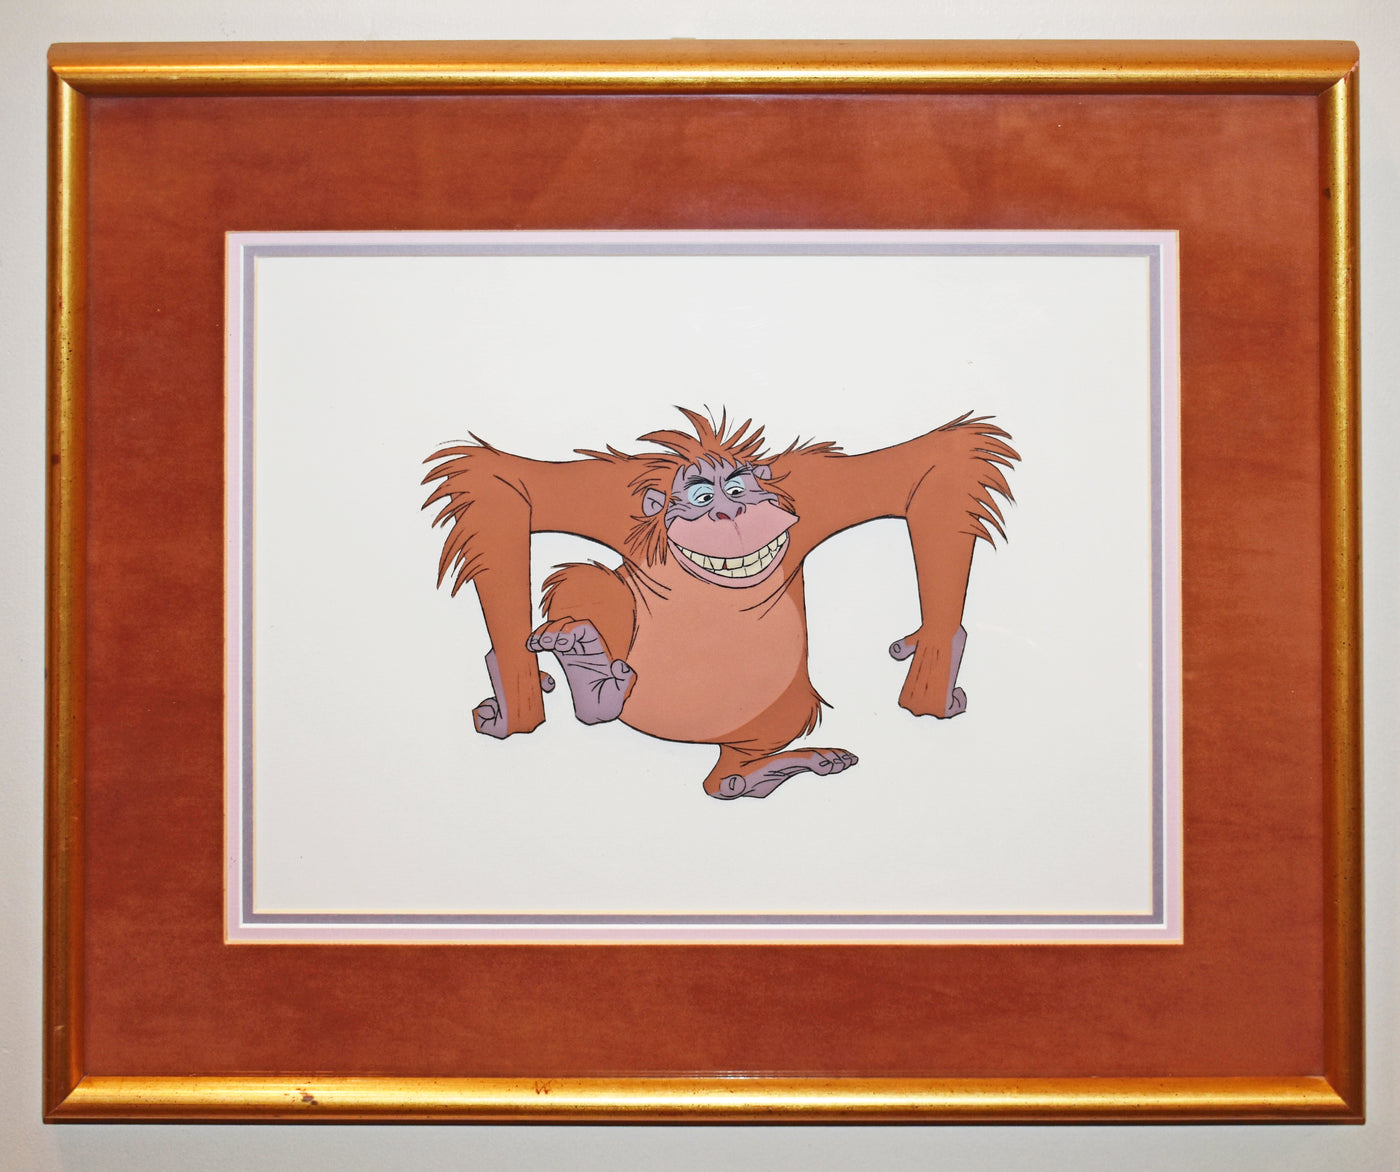 Original Walt Disney Production Cel from The Jungle Book featuring King Louie